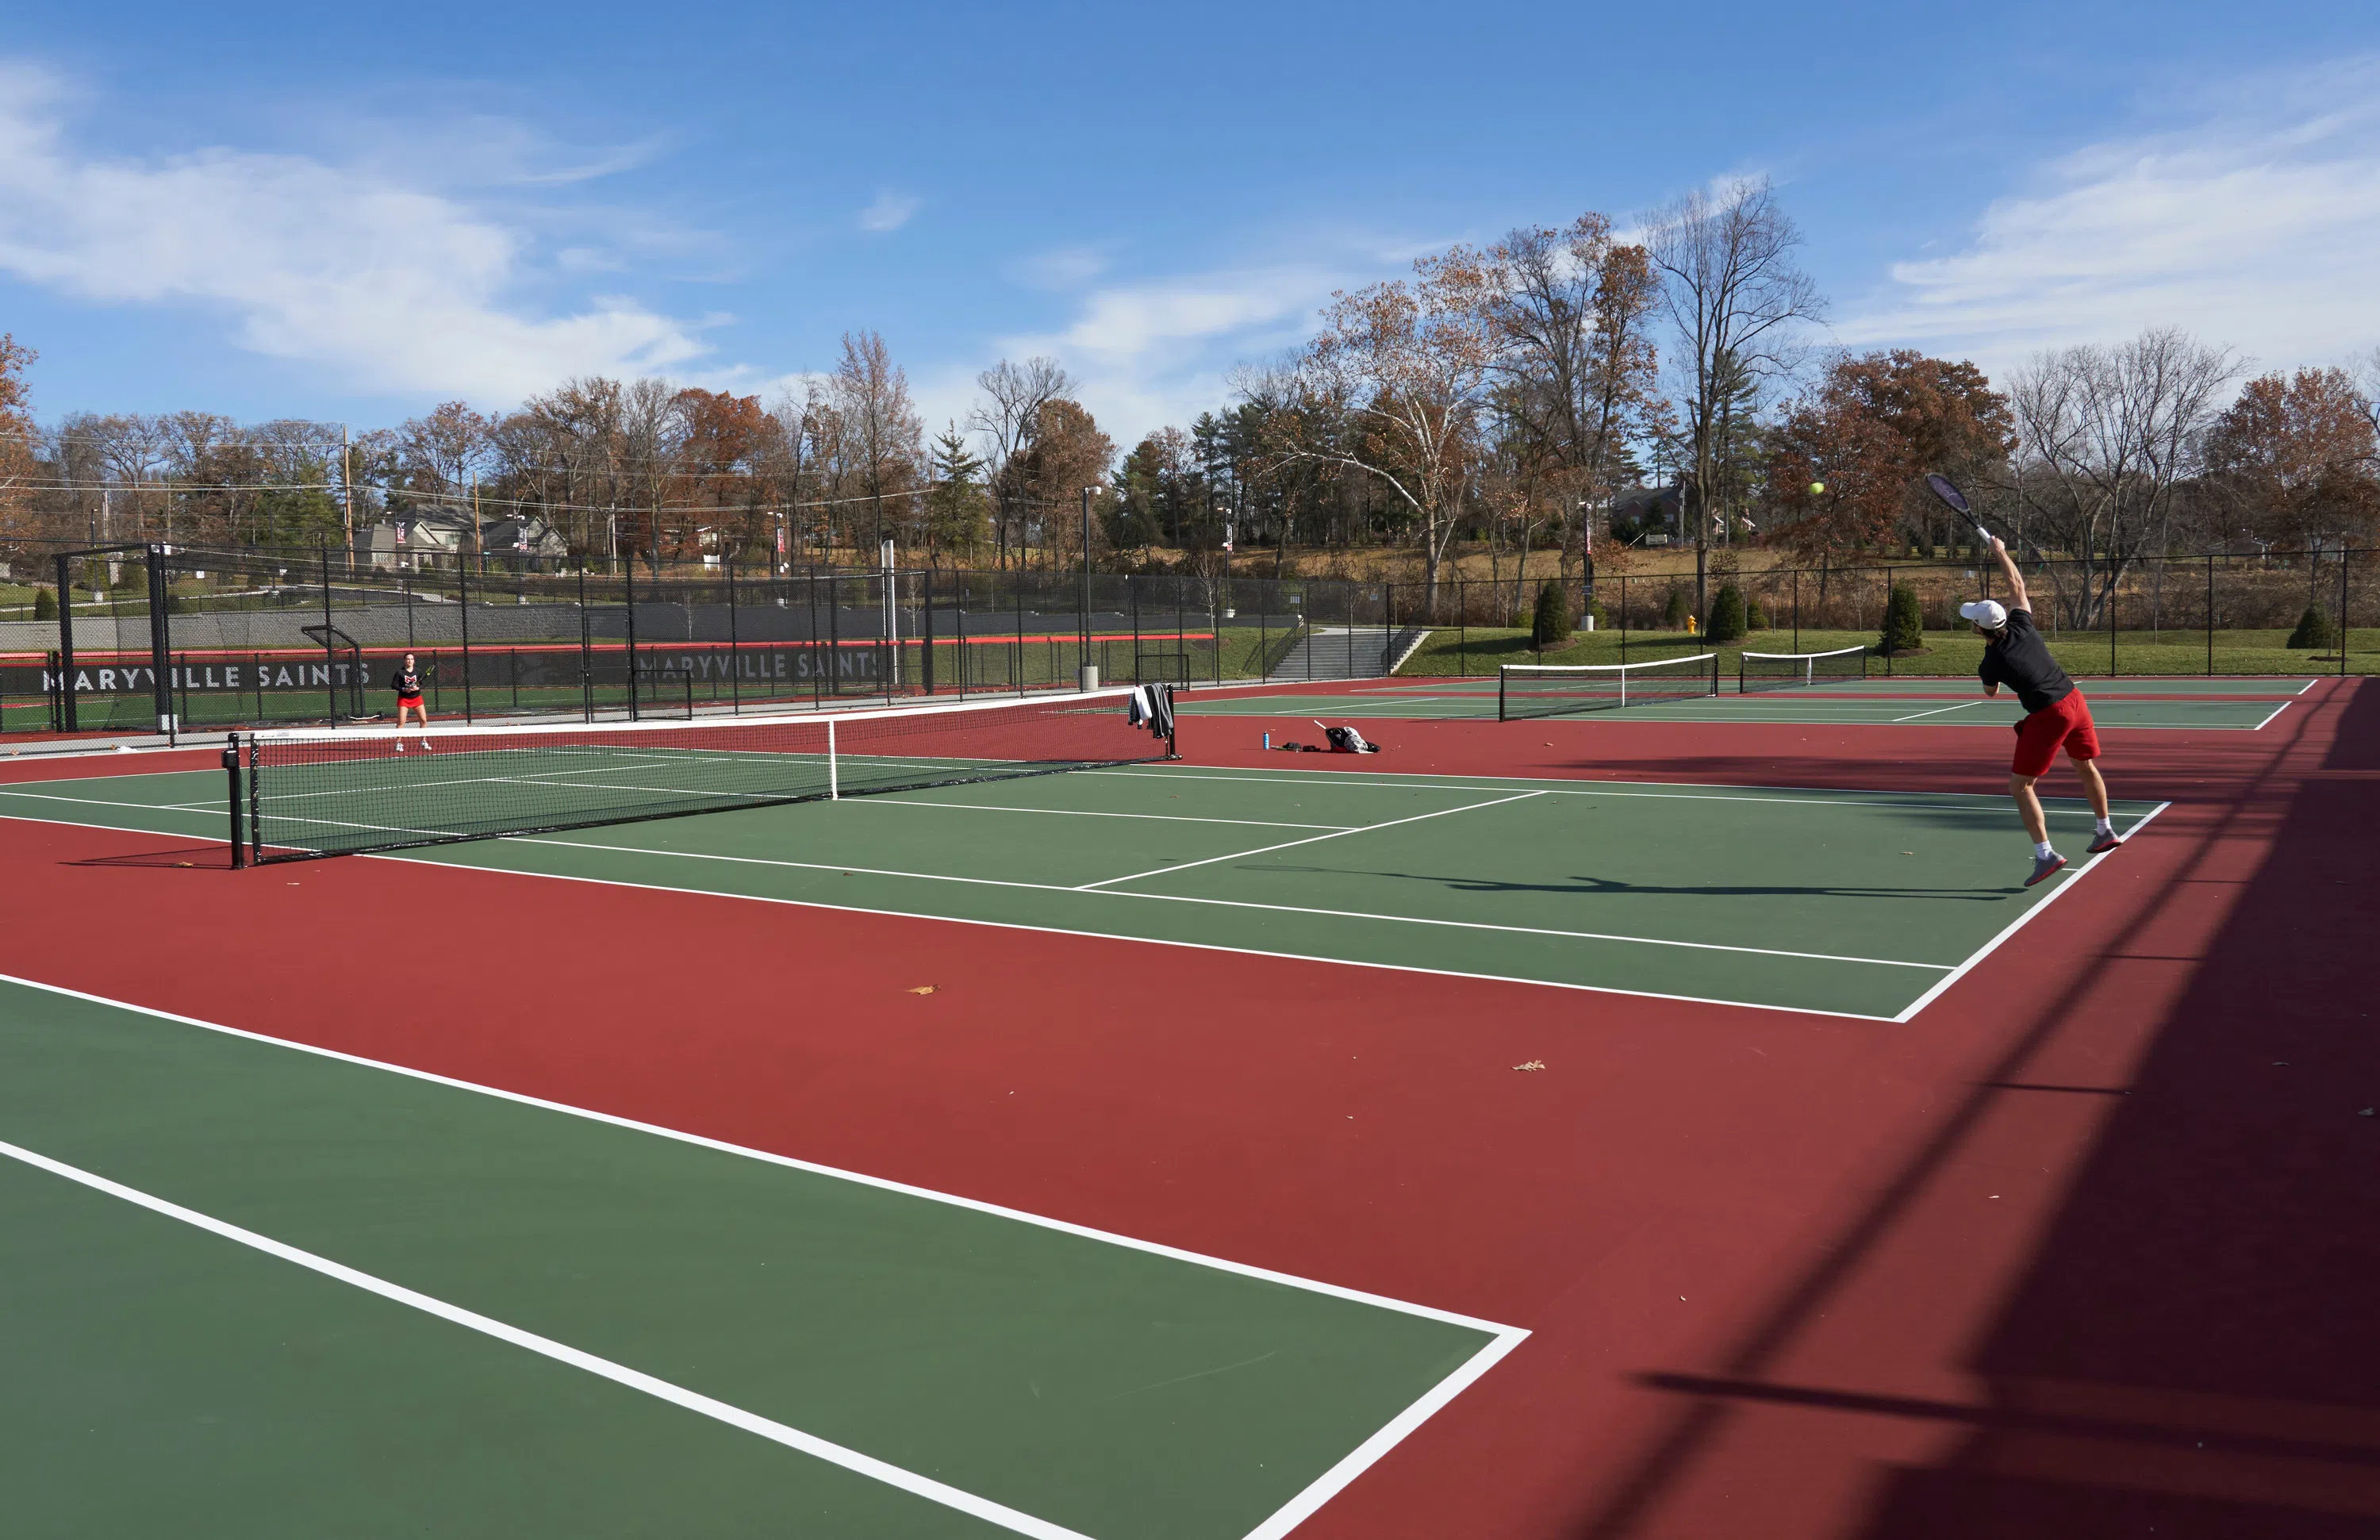 Tennis courts at the athletic complex.